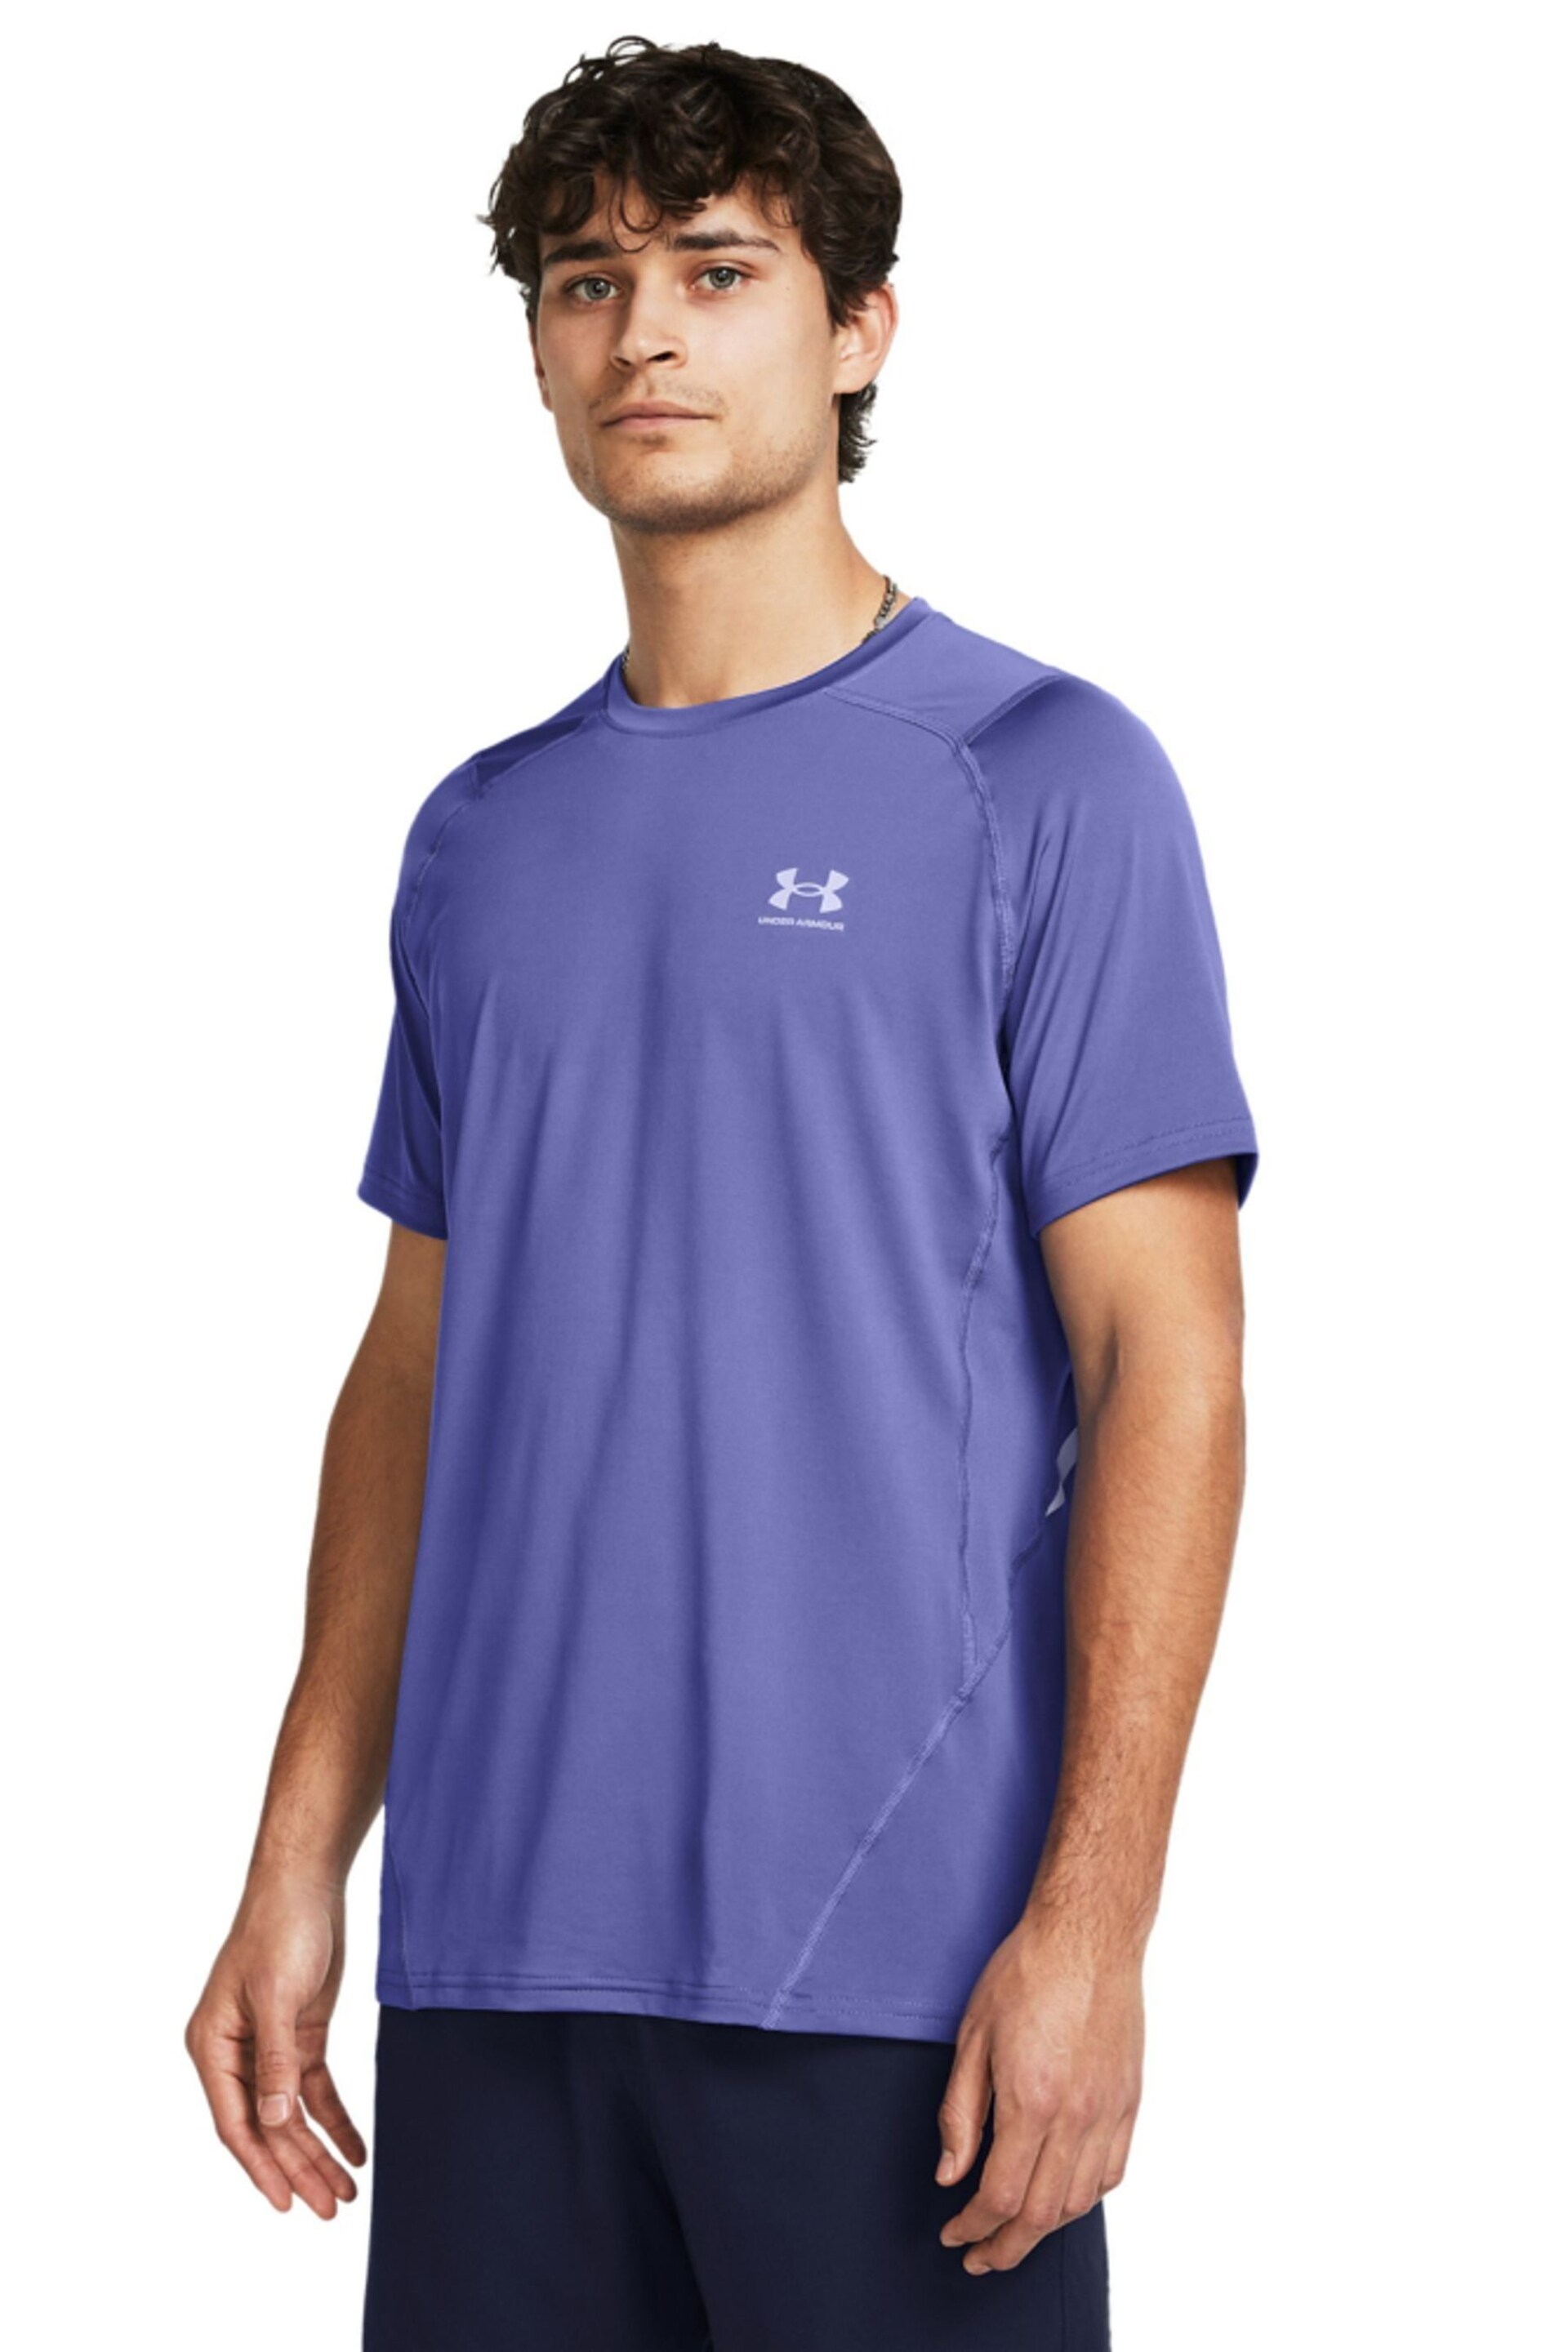 Under Armour Blue HeatGear Fitted Short Sleeve T-Shirt - Image 1 of 4